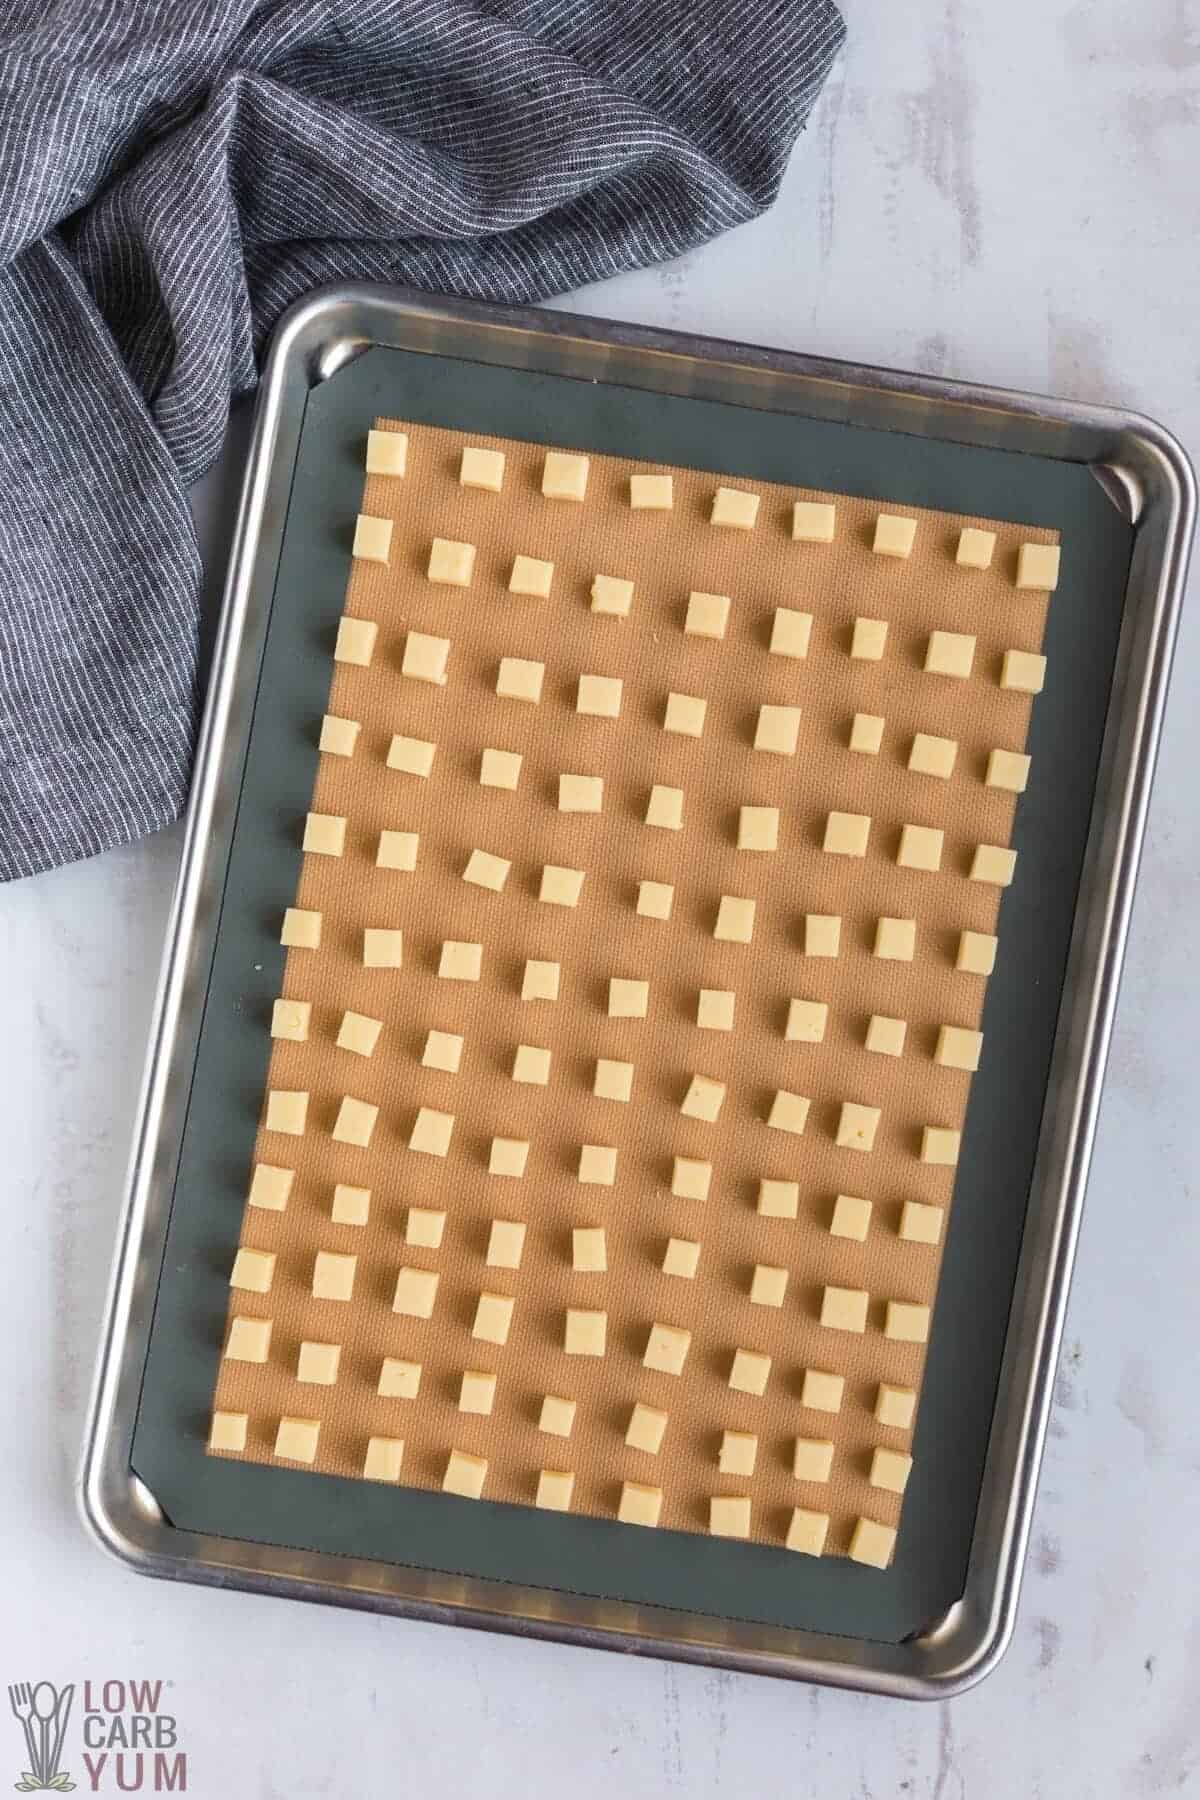 cubed cheese on lined baking sheet pan